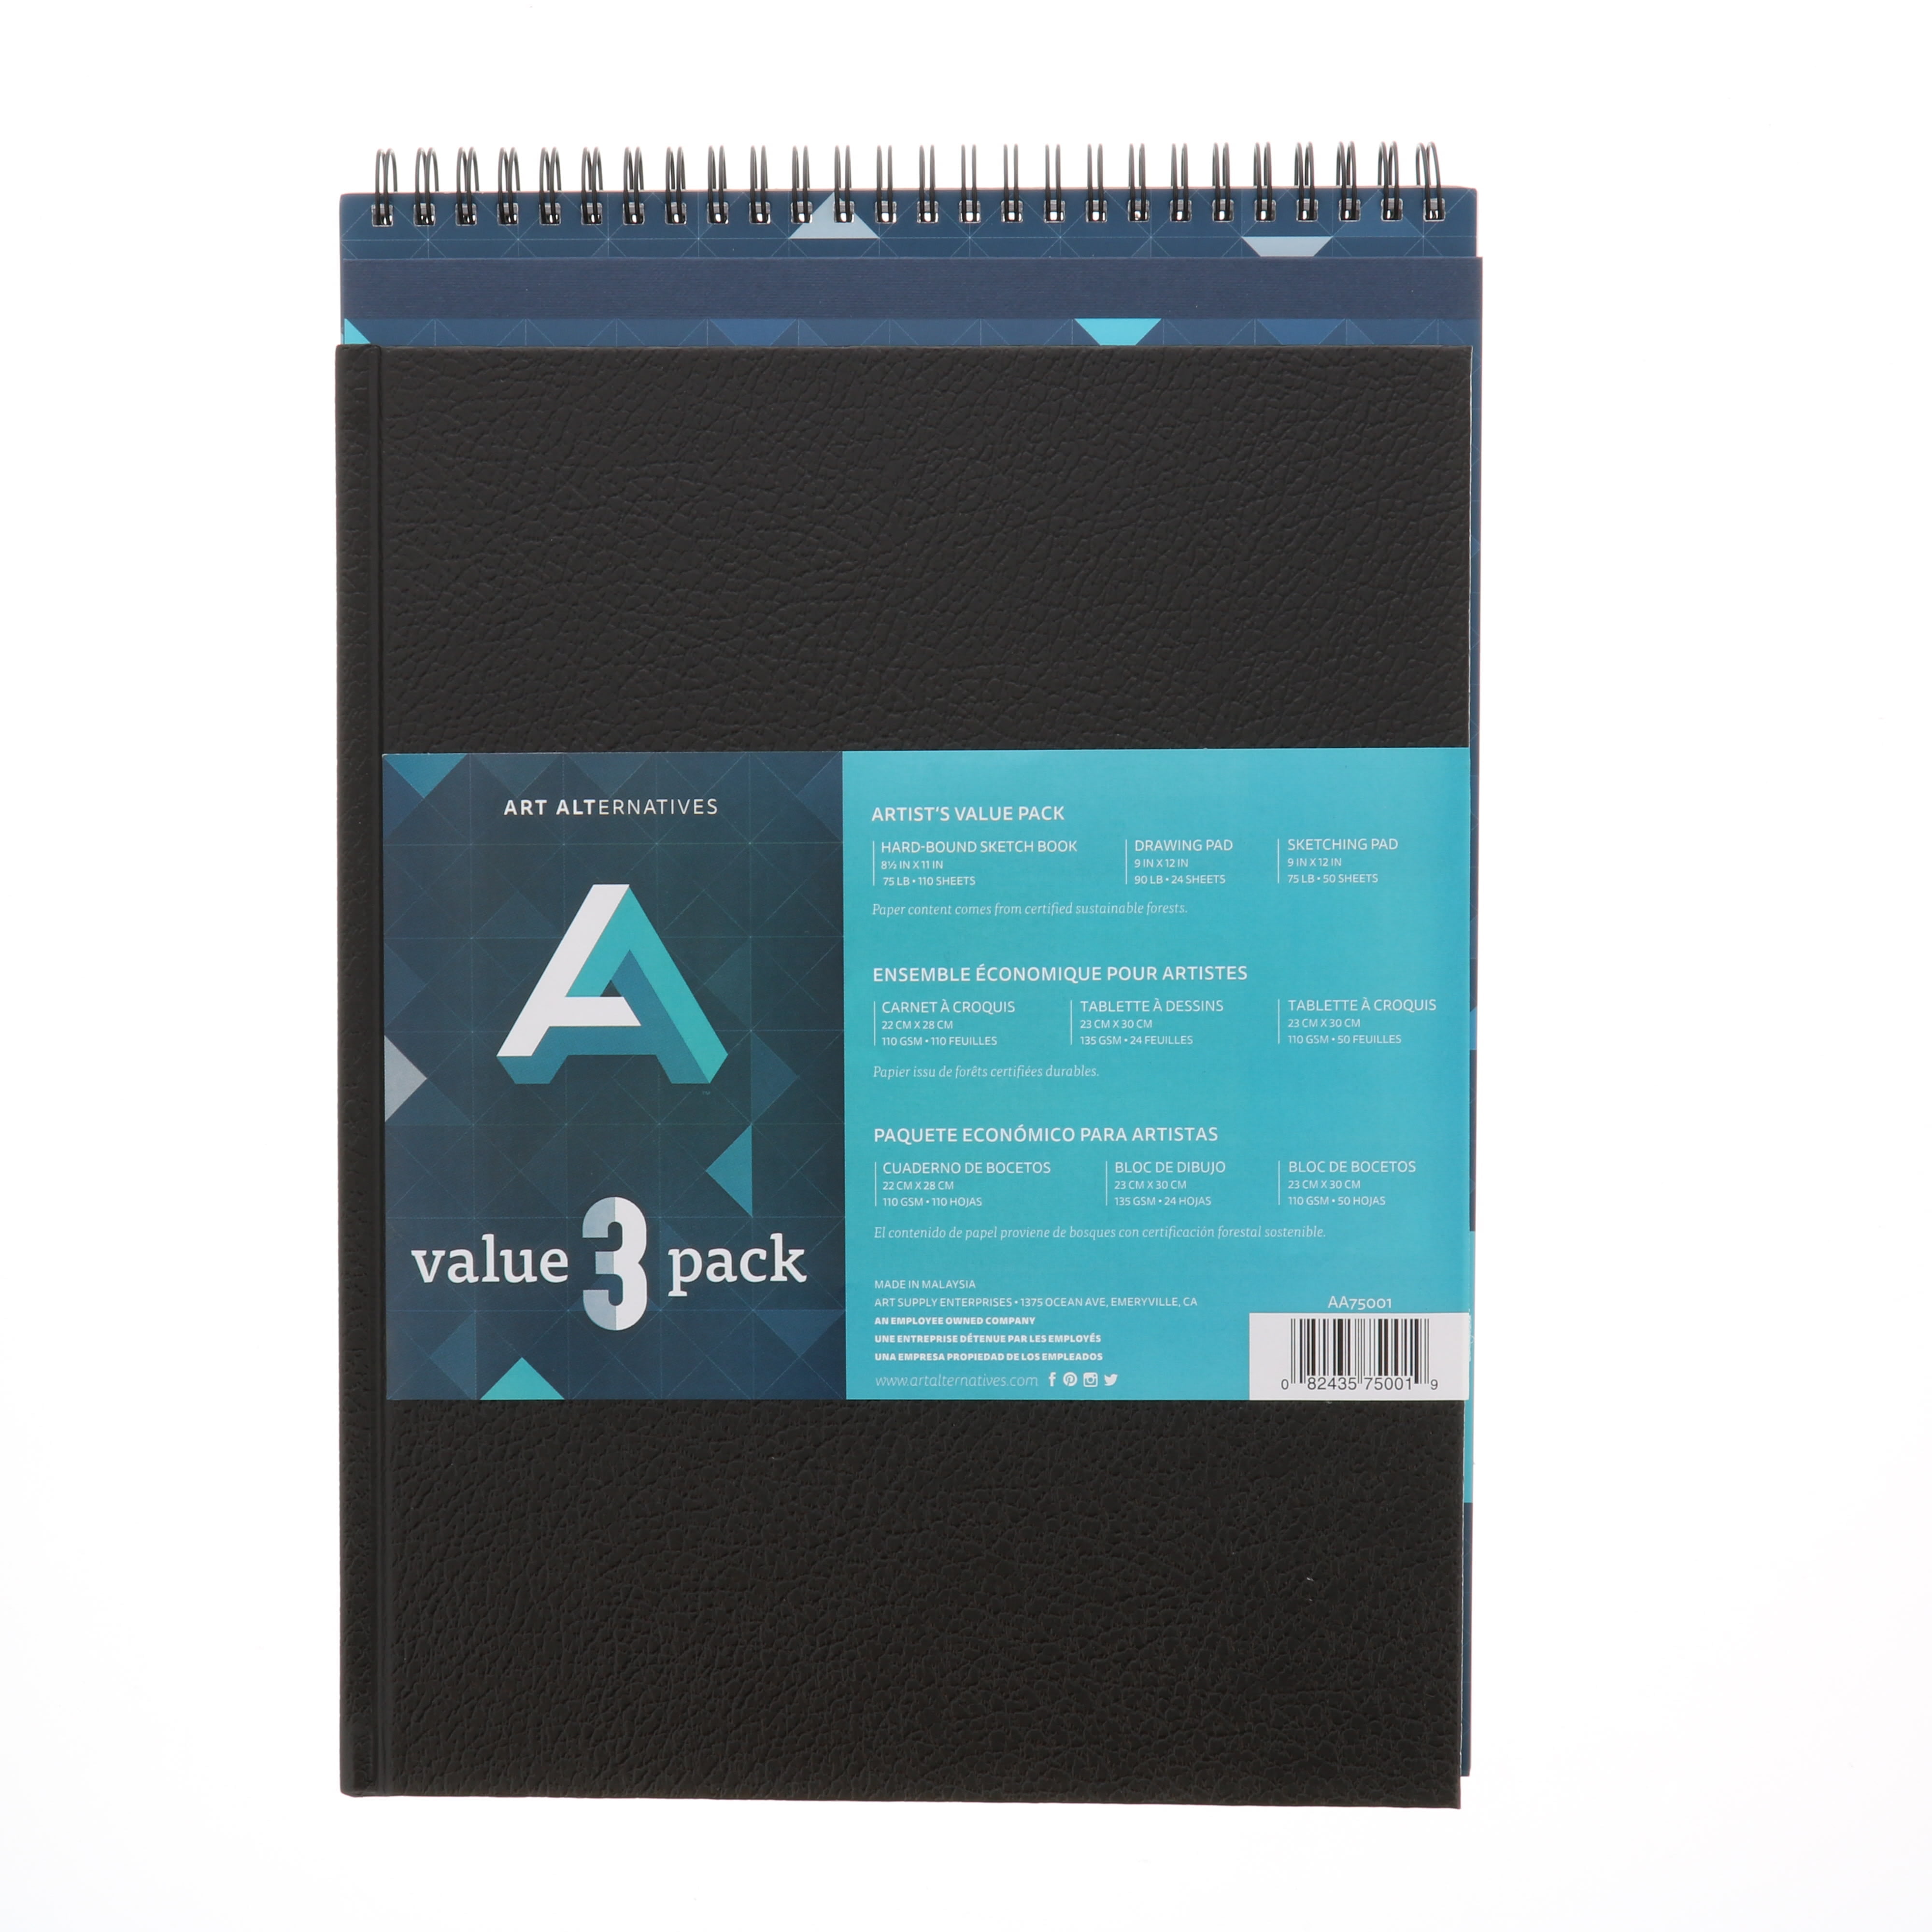 Arteza Black Paper Sketch Pad, 9x12, 30 Sheets of Drawing Paper - 2 Pack